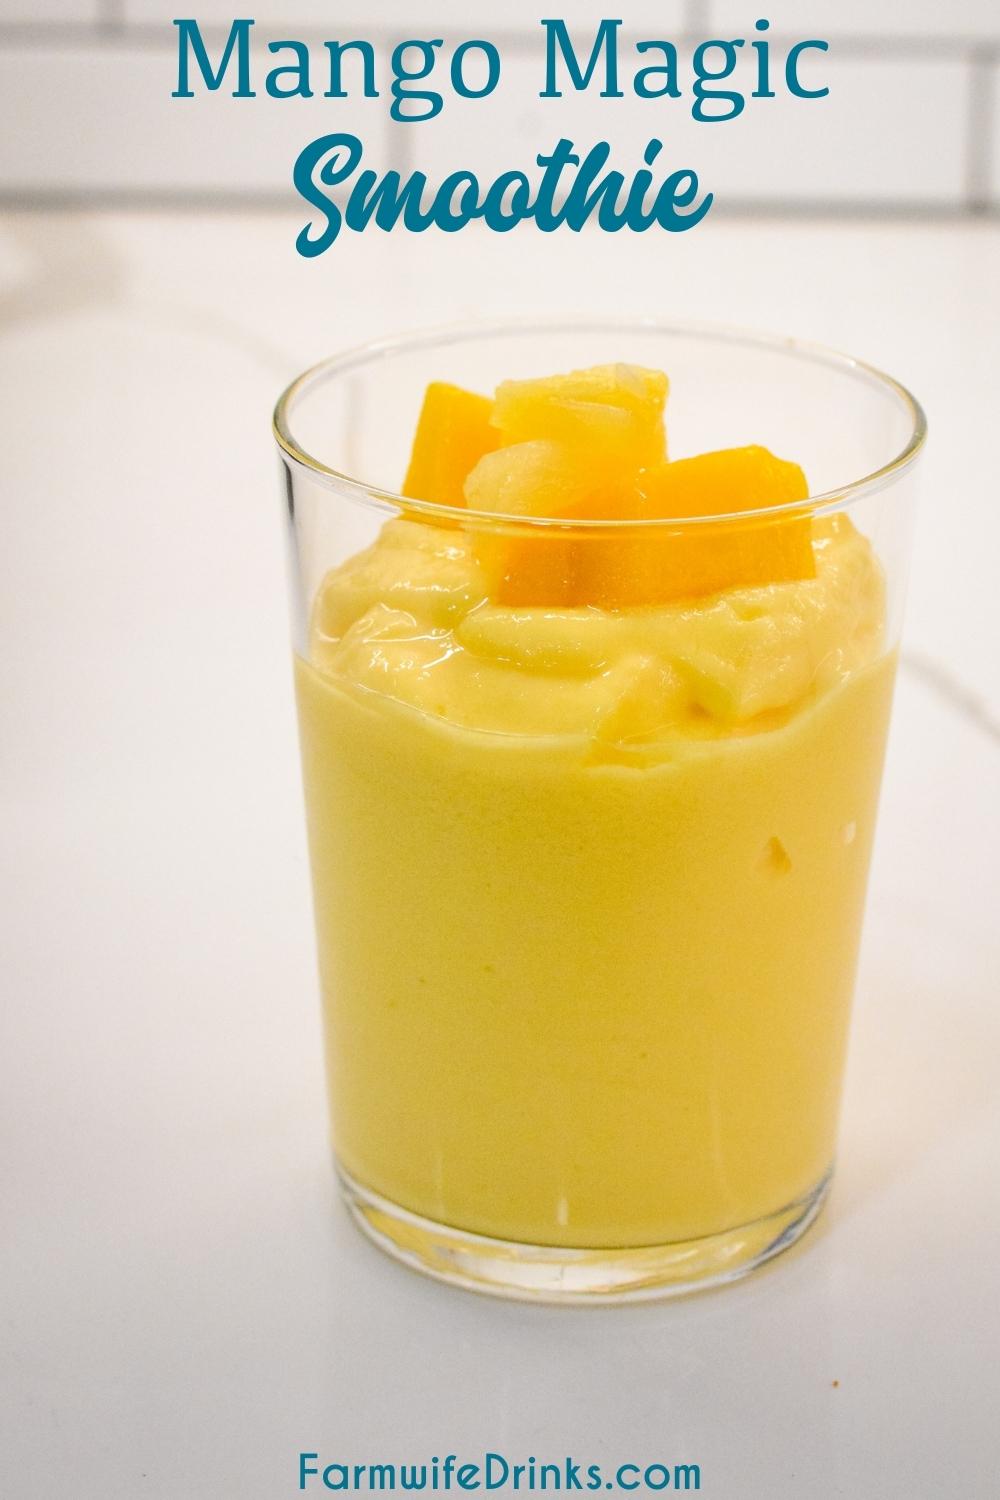 Mango Magic Smoothie is the current smoothie obsession by my swimmer that is made as a copycat to the Tropical Smoothie Cafe smoothie with just three simple ingredients of mango, pineapple, and greek yogurt.